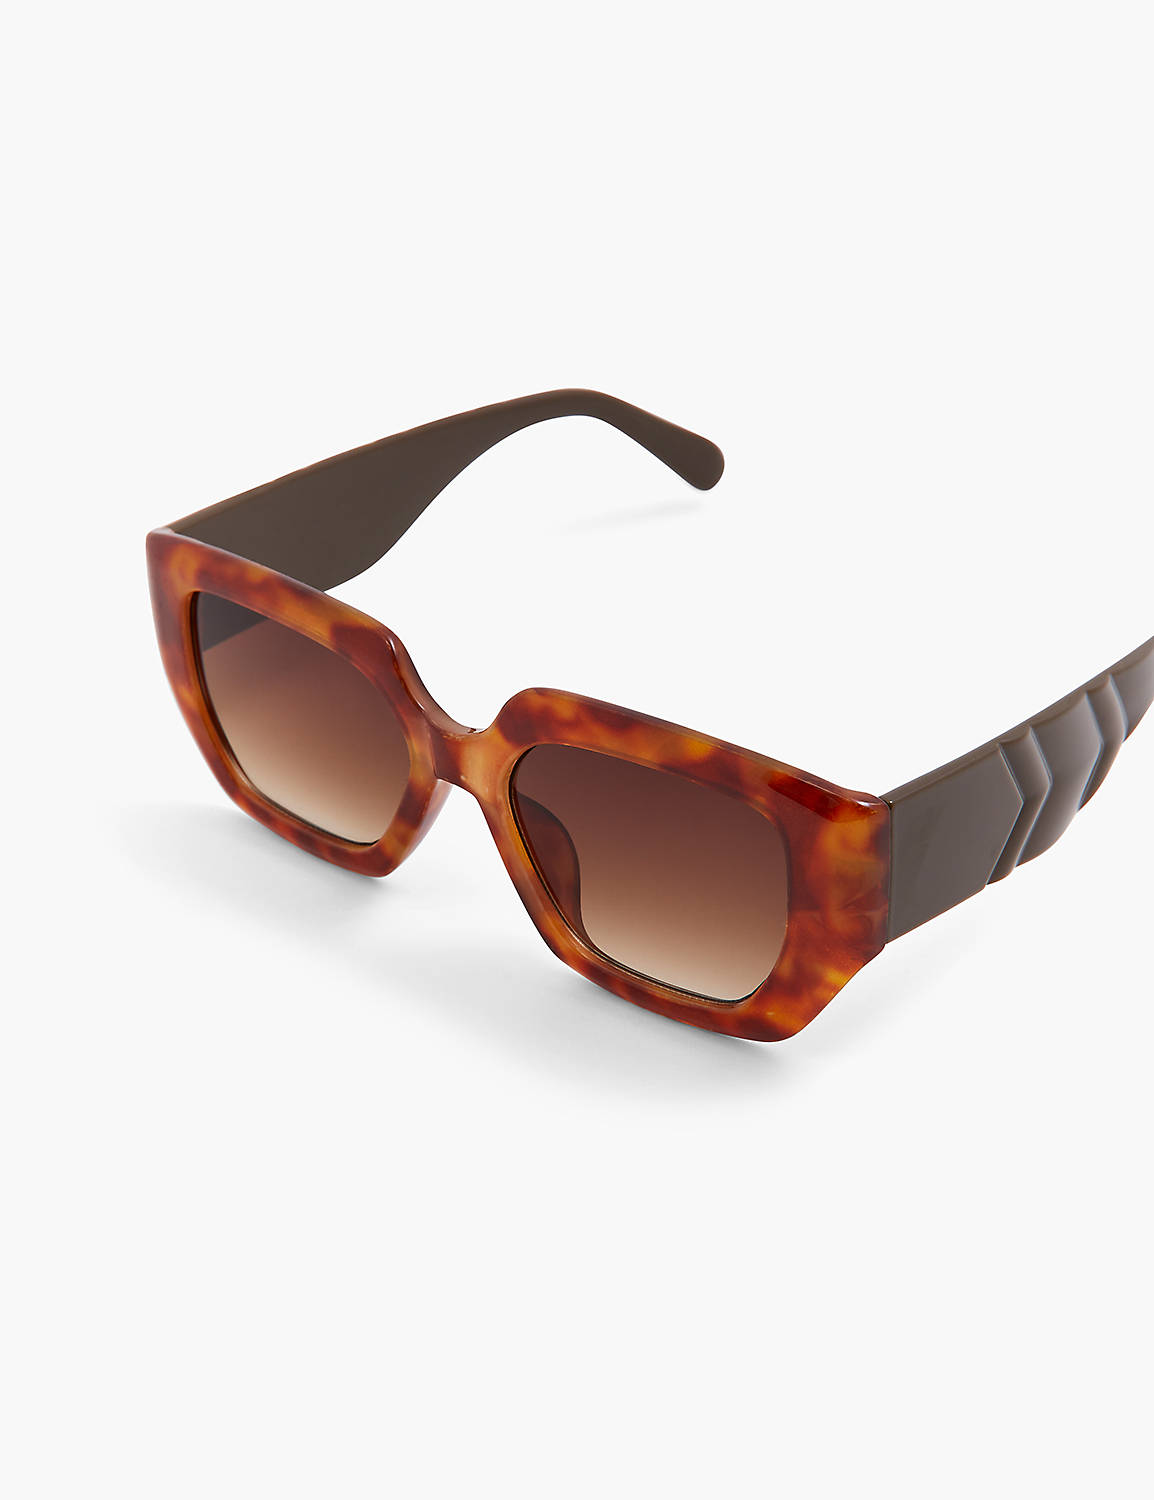 Blonde Tort with Brown Square Sungl Product Image 1